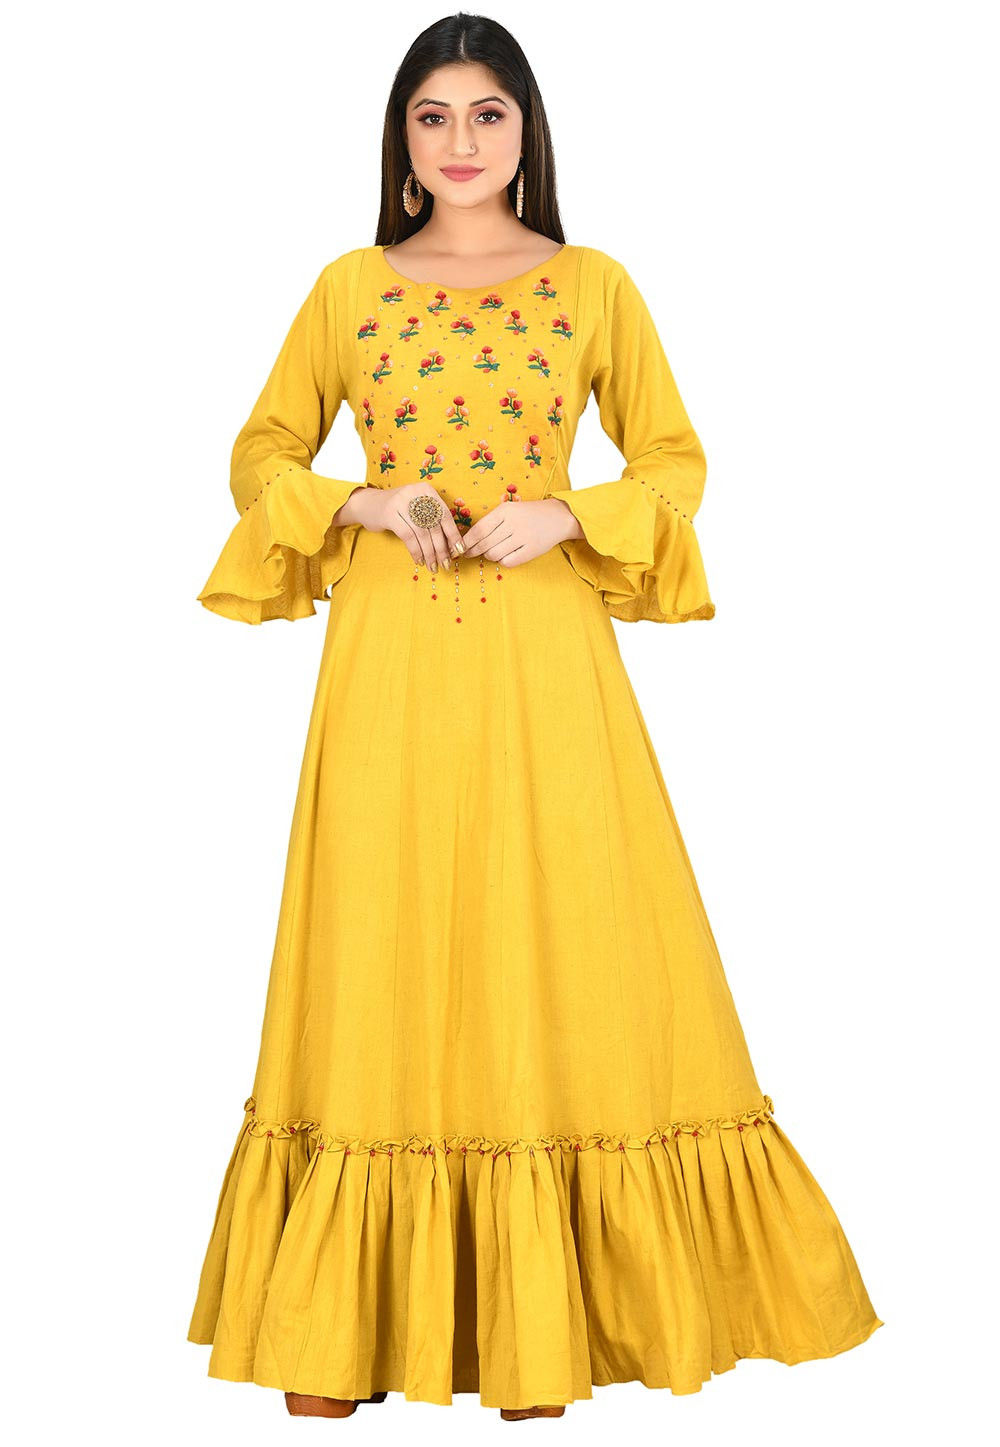 Buy Embroidered Cotton Flex Ruffled Hemline Gown in Yellow Online ...